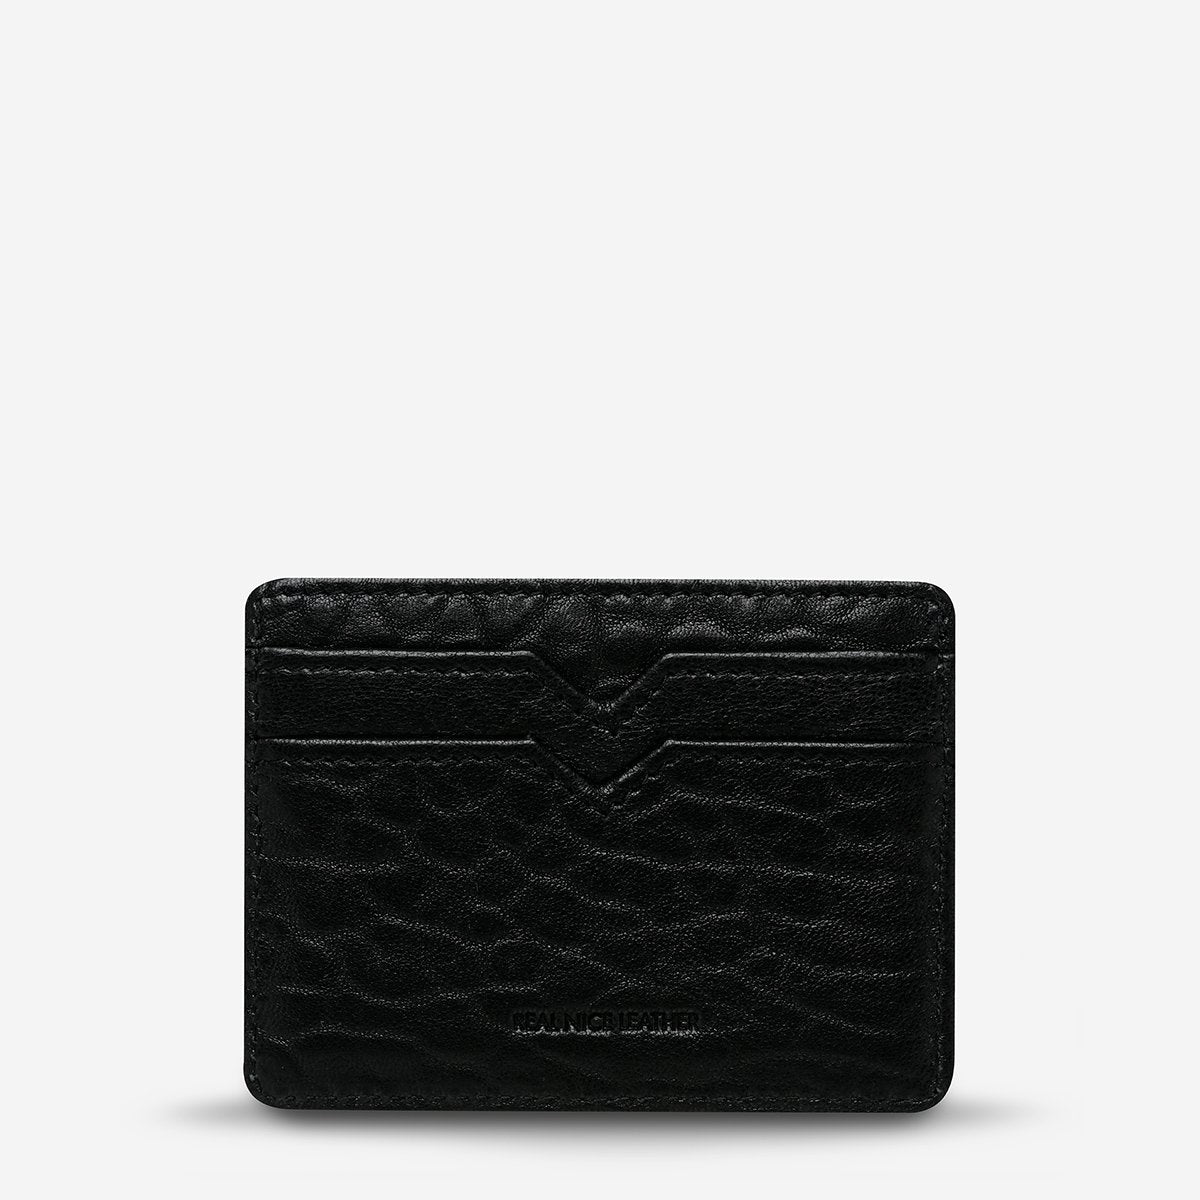 Status anxiety minimal card wallet black bubble leather together for now